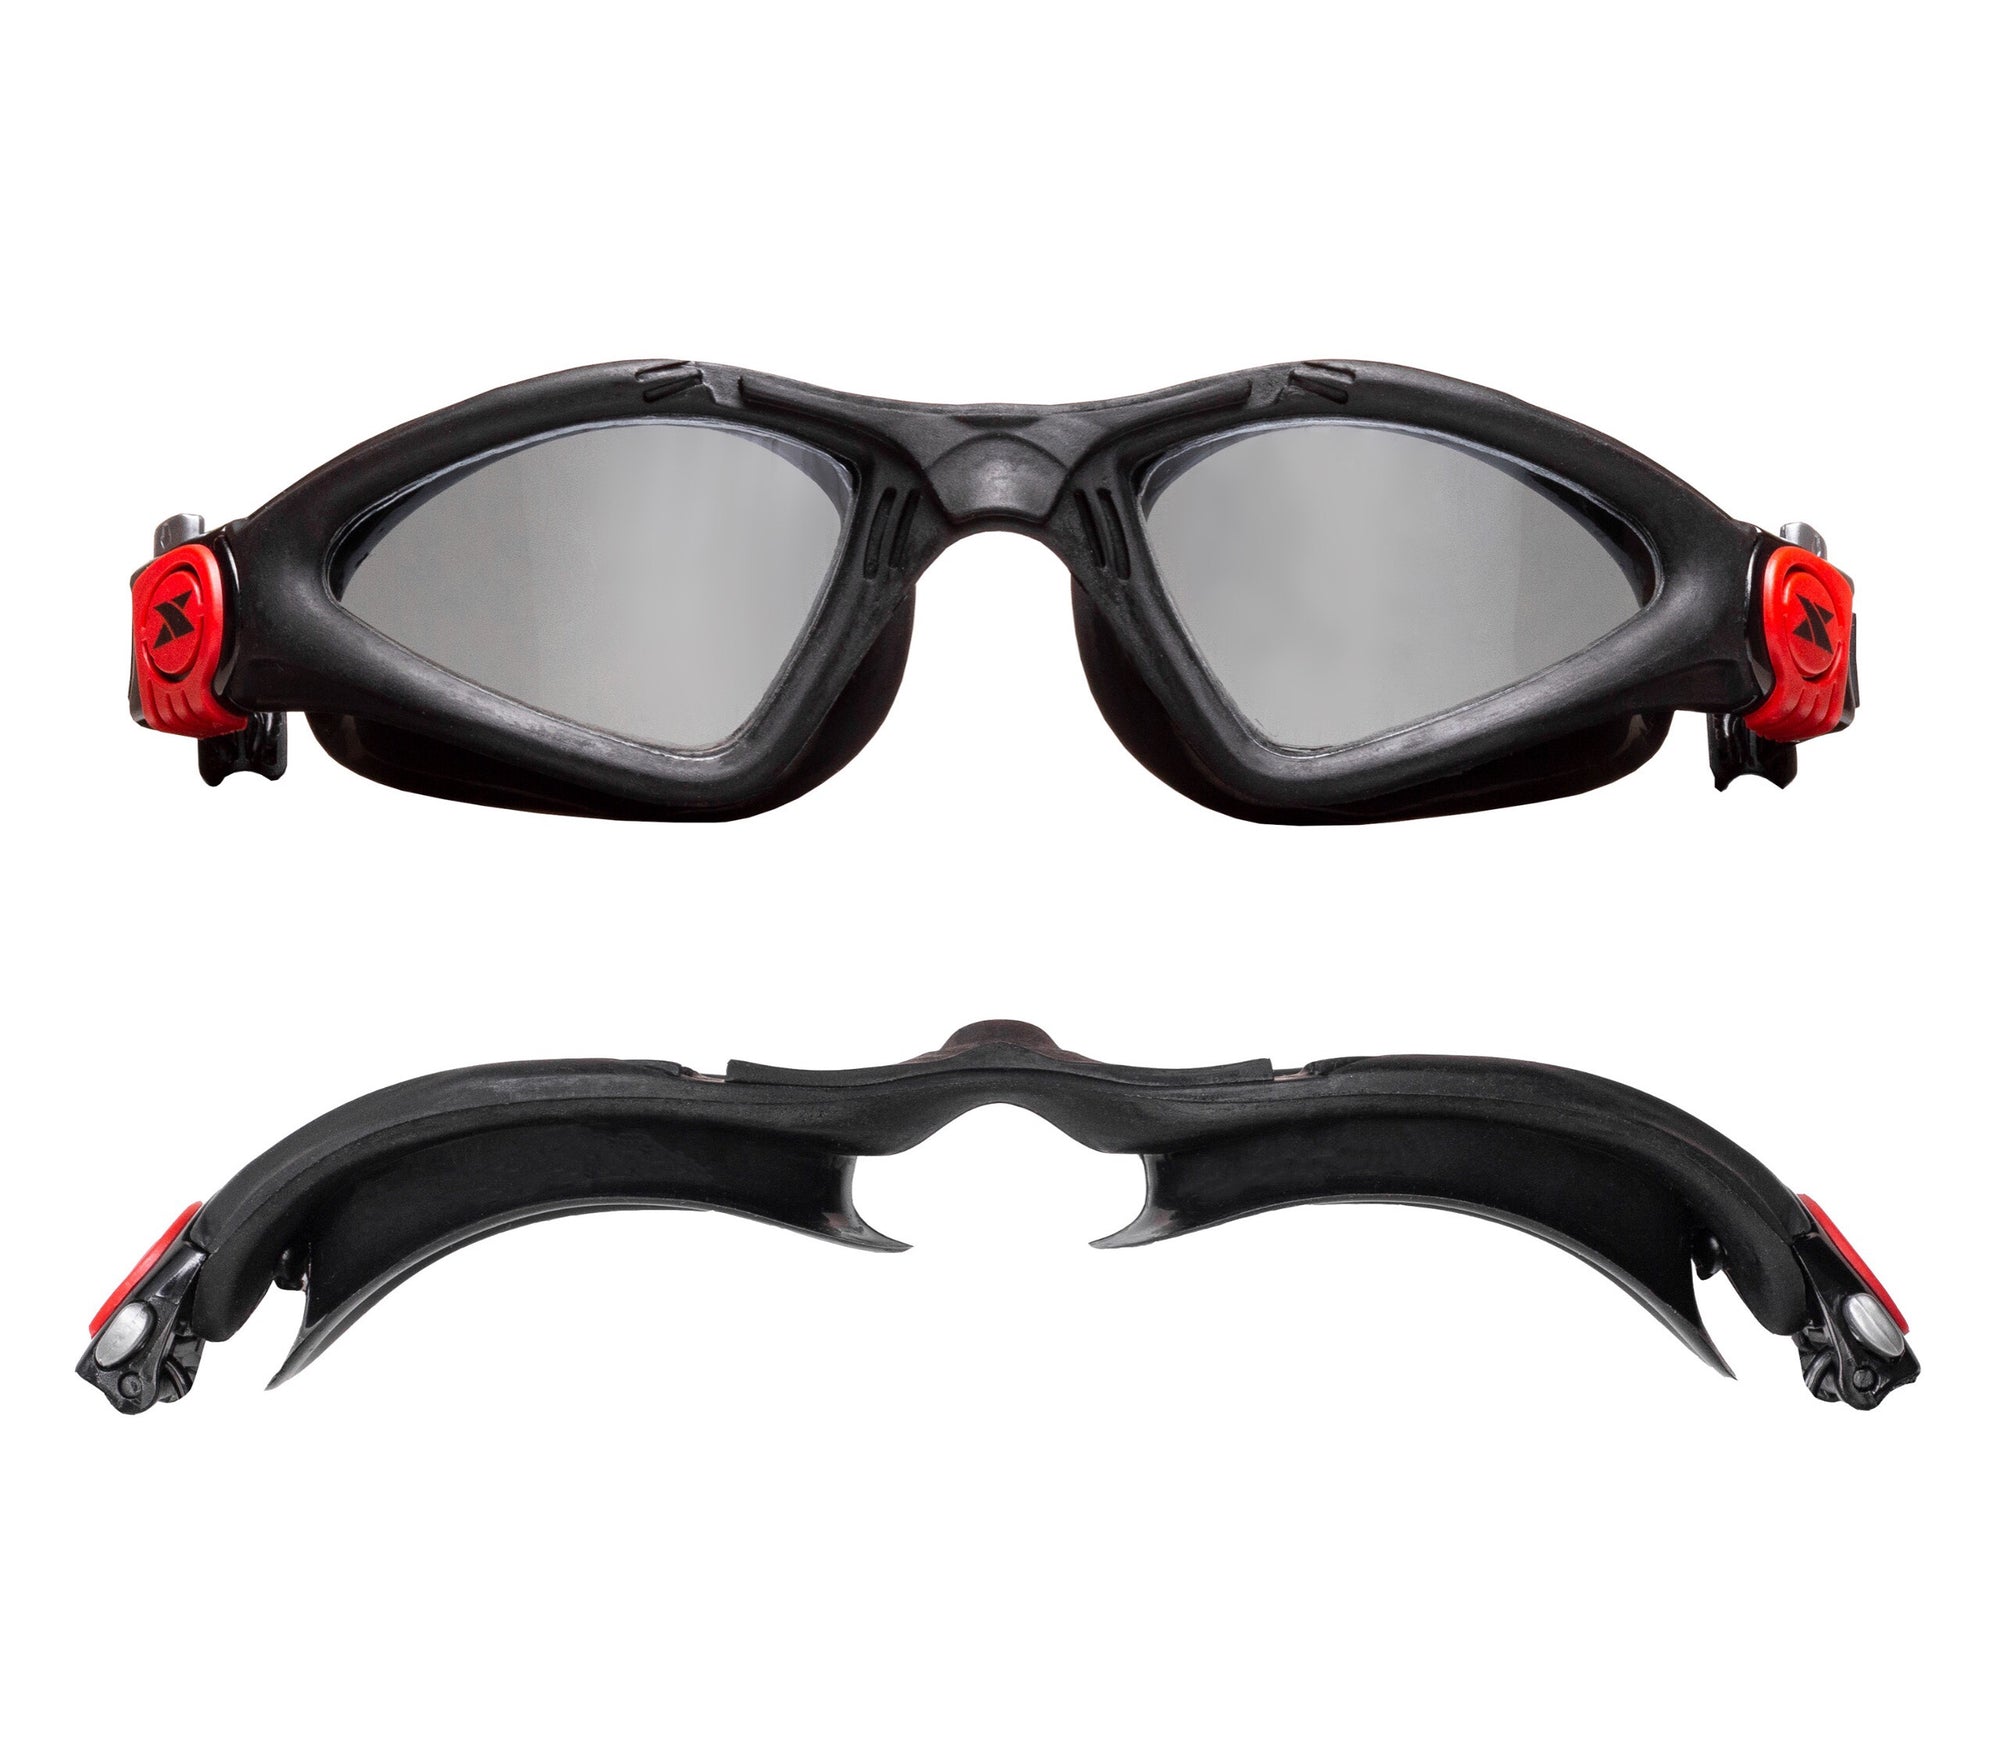 The best swimming goggles for training, racing, and triathlon